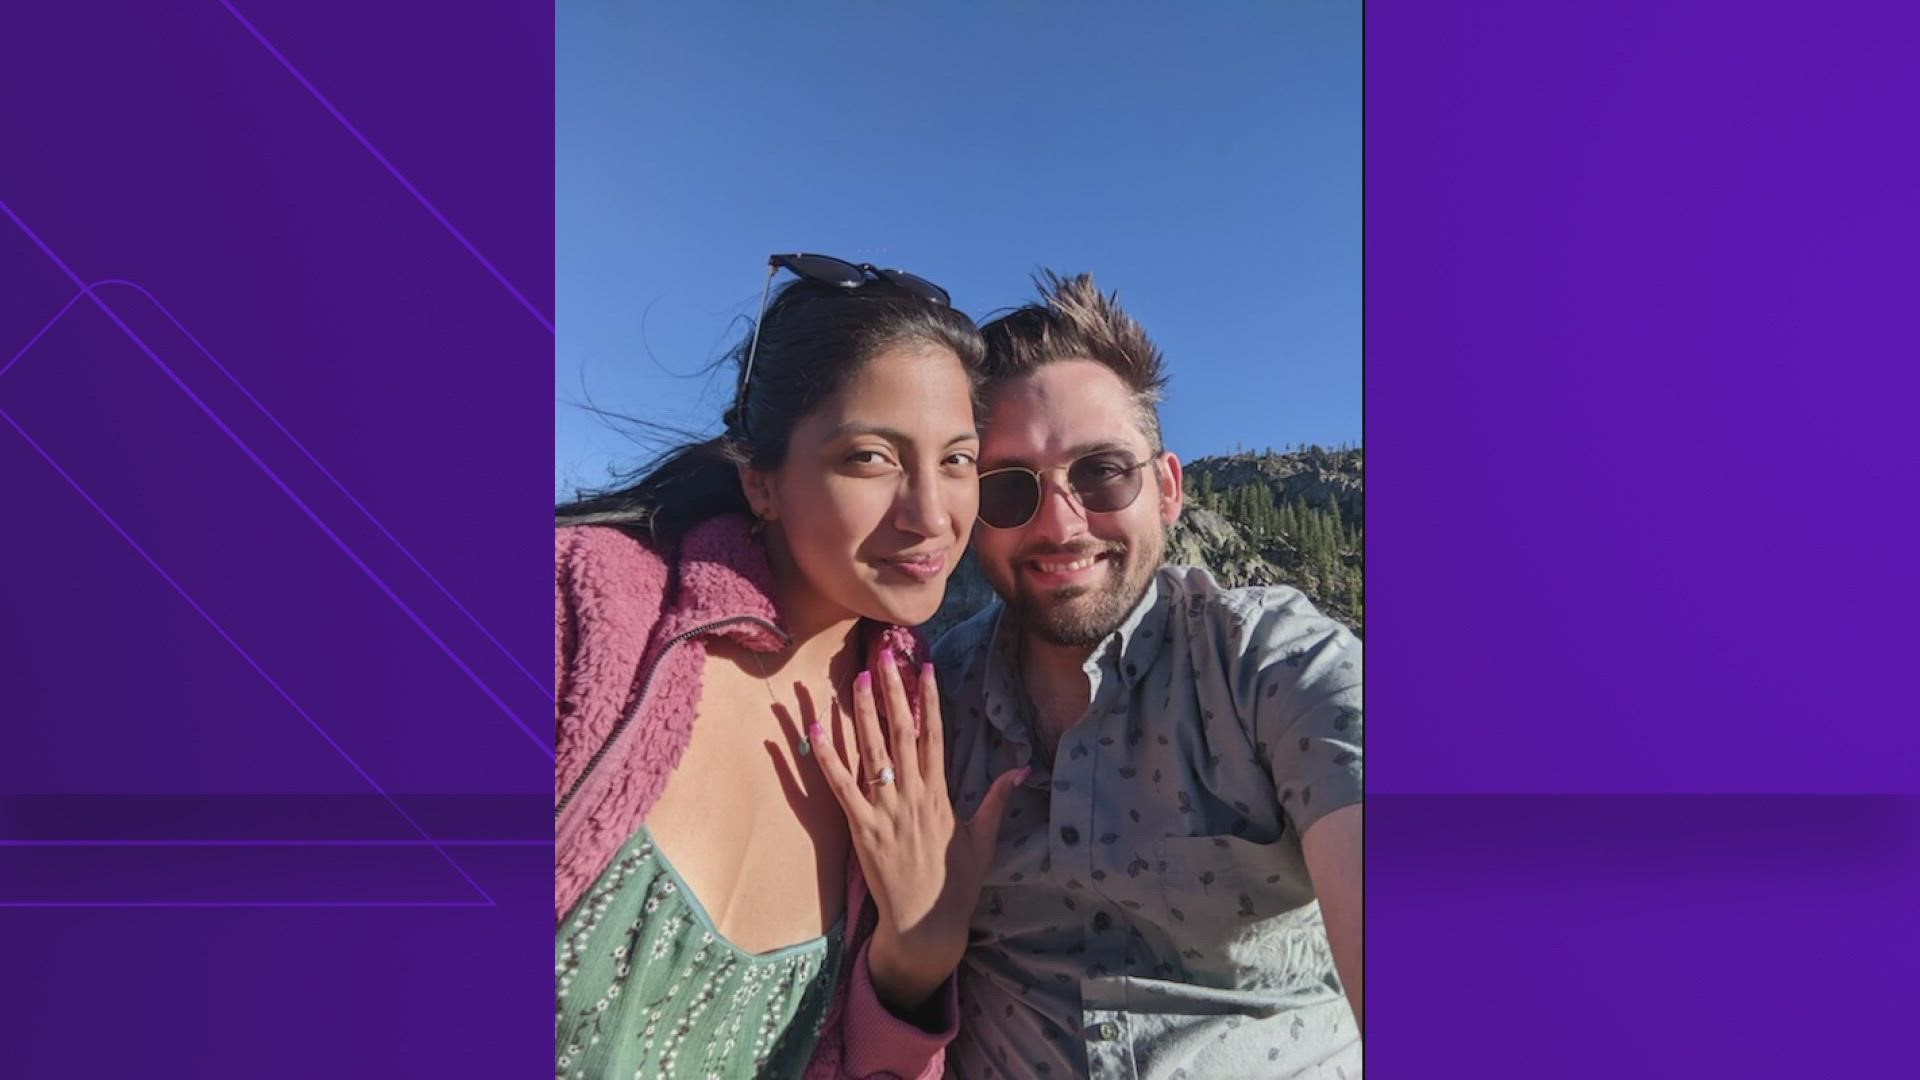 Congrats to our Producer Samantha Cruz on her engagement!